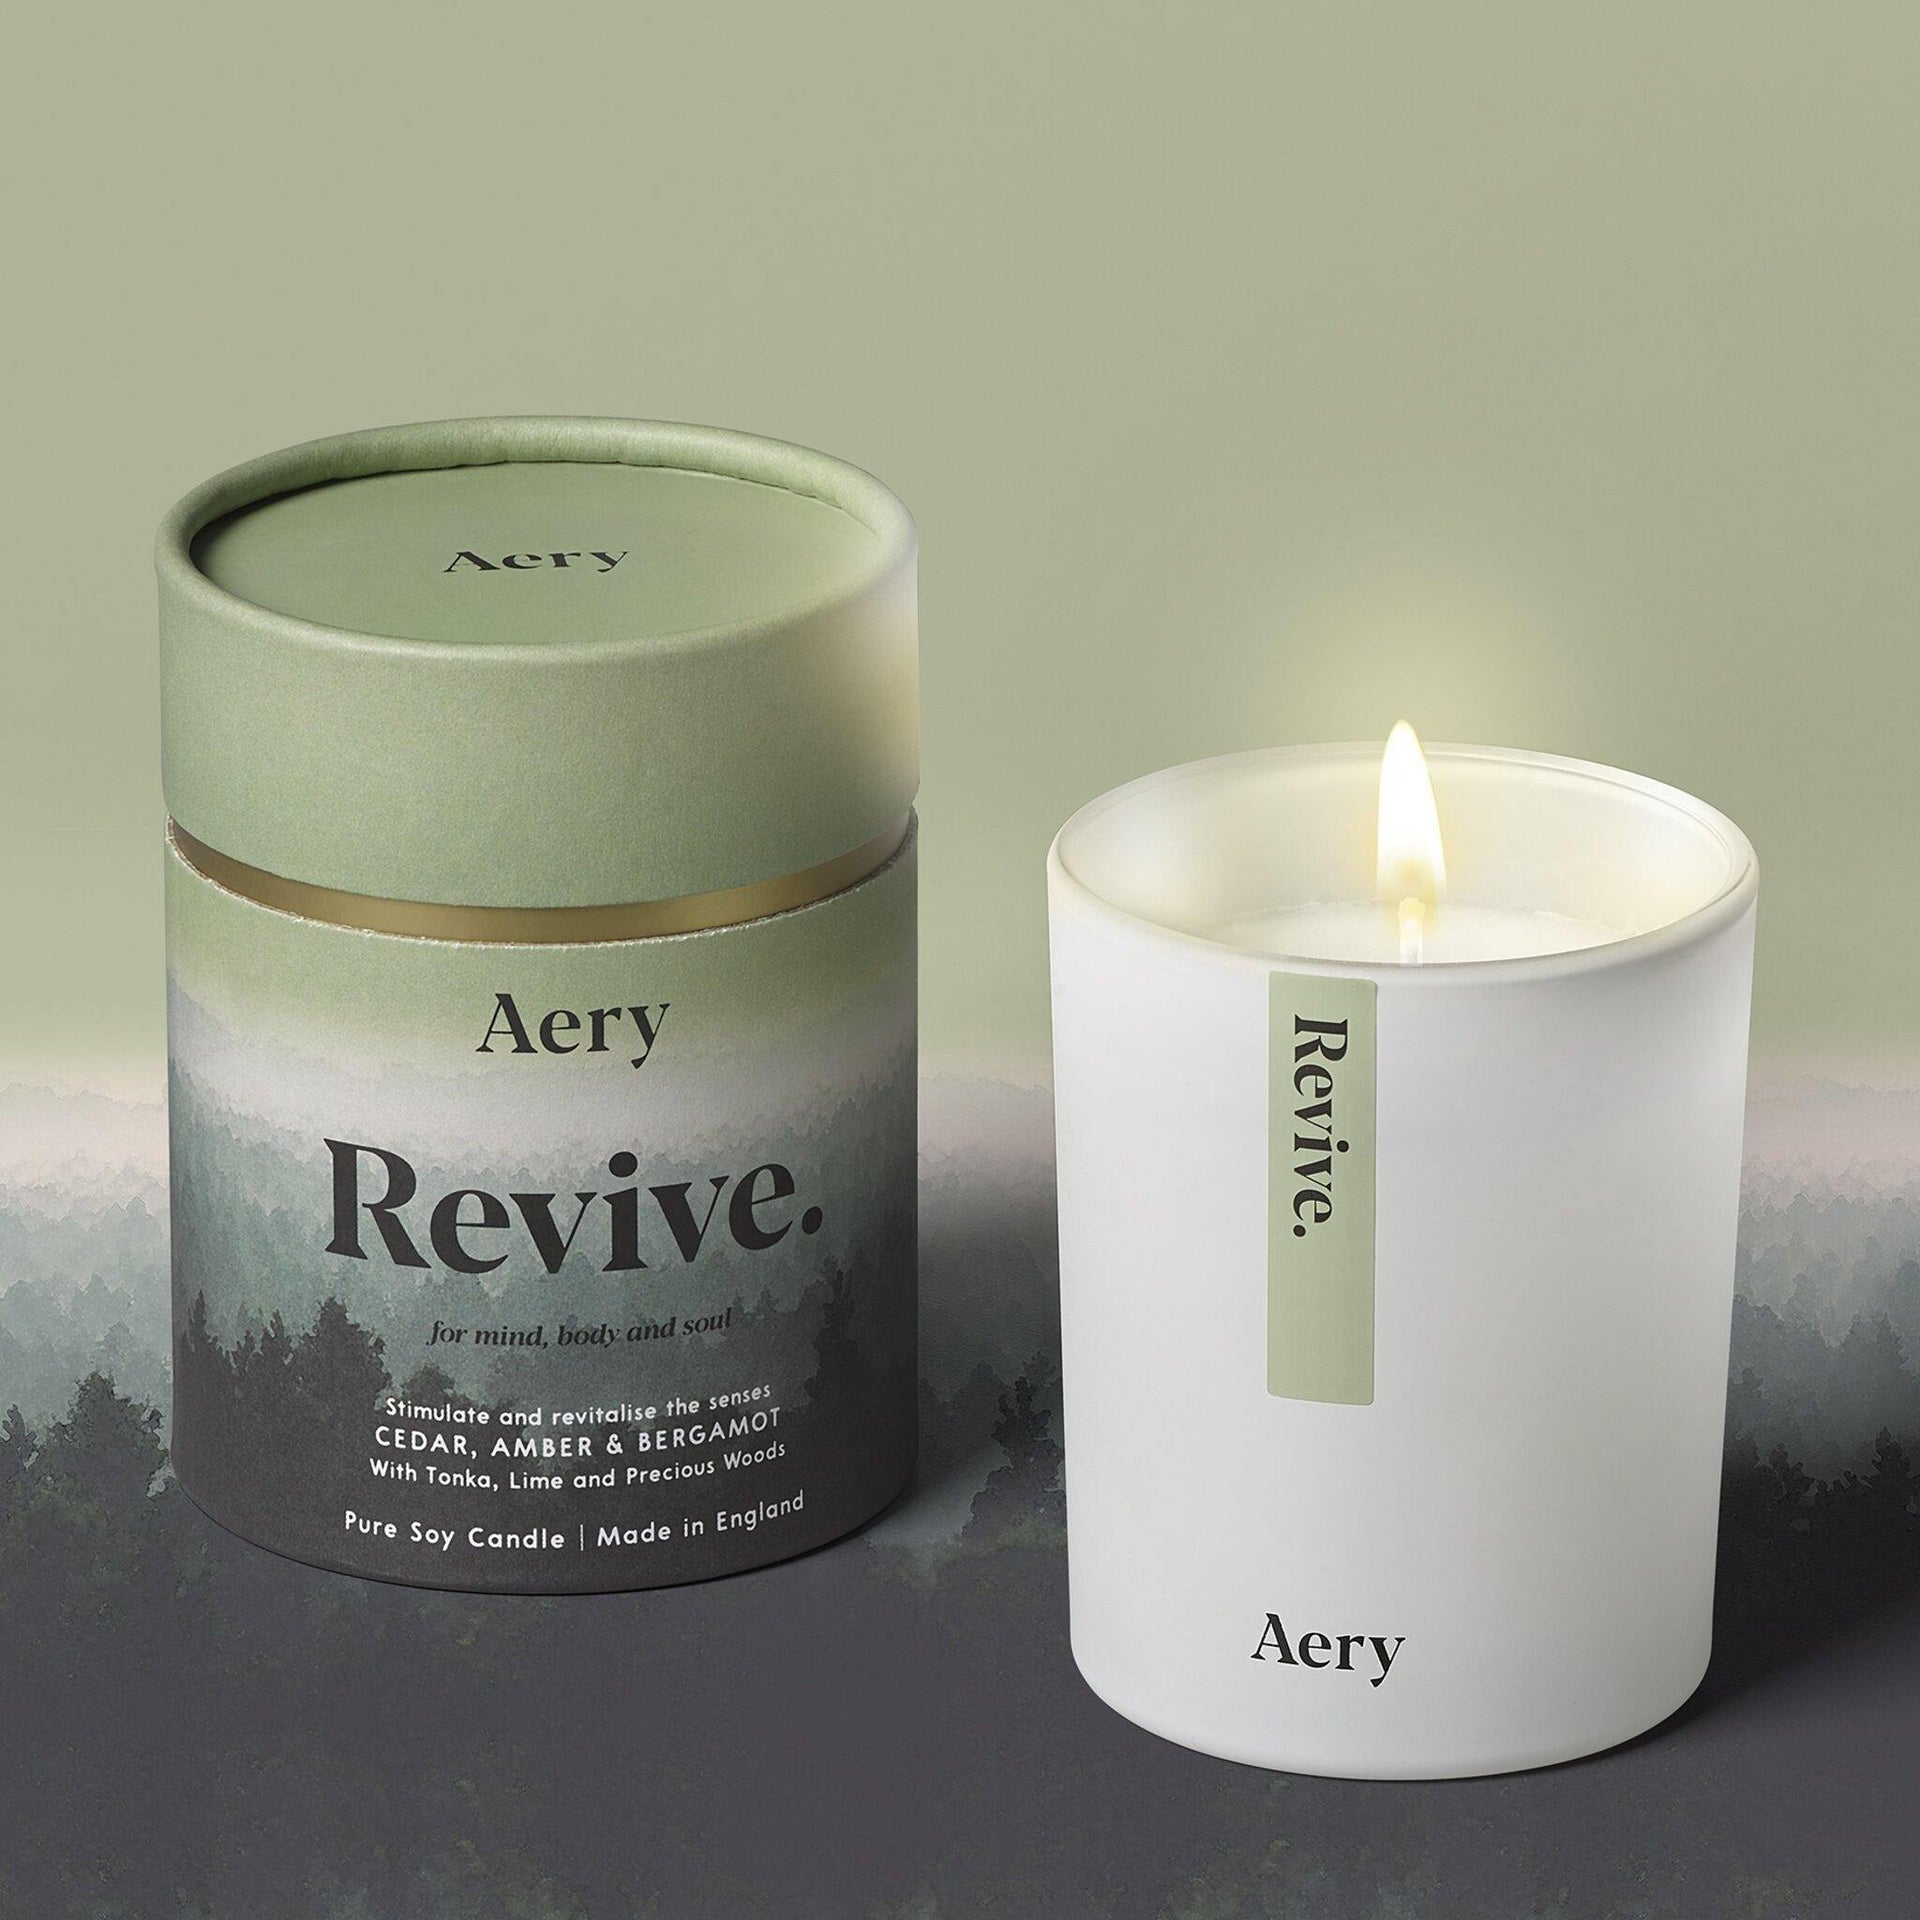 Aery Living Mindful 200g Soy Candle-Revive  | Scented Candles | Candle Fragrances | Soy Candles | Newcastle Candles | Best Candles | Nice Candles | Gifts | Best Gifts | Wax Candles | Mothers Day Gifts | Christmas Gifts | Candles Australia | Candle Shop | Presents | Sydney Candles | Brisbane Candles | Townsville Candles | Melbourne Candles | Perth Candles | Soy Wax | Accepts Bitcoin | Candles Online | Accepts Crypto currency | Upcycle Studio